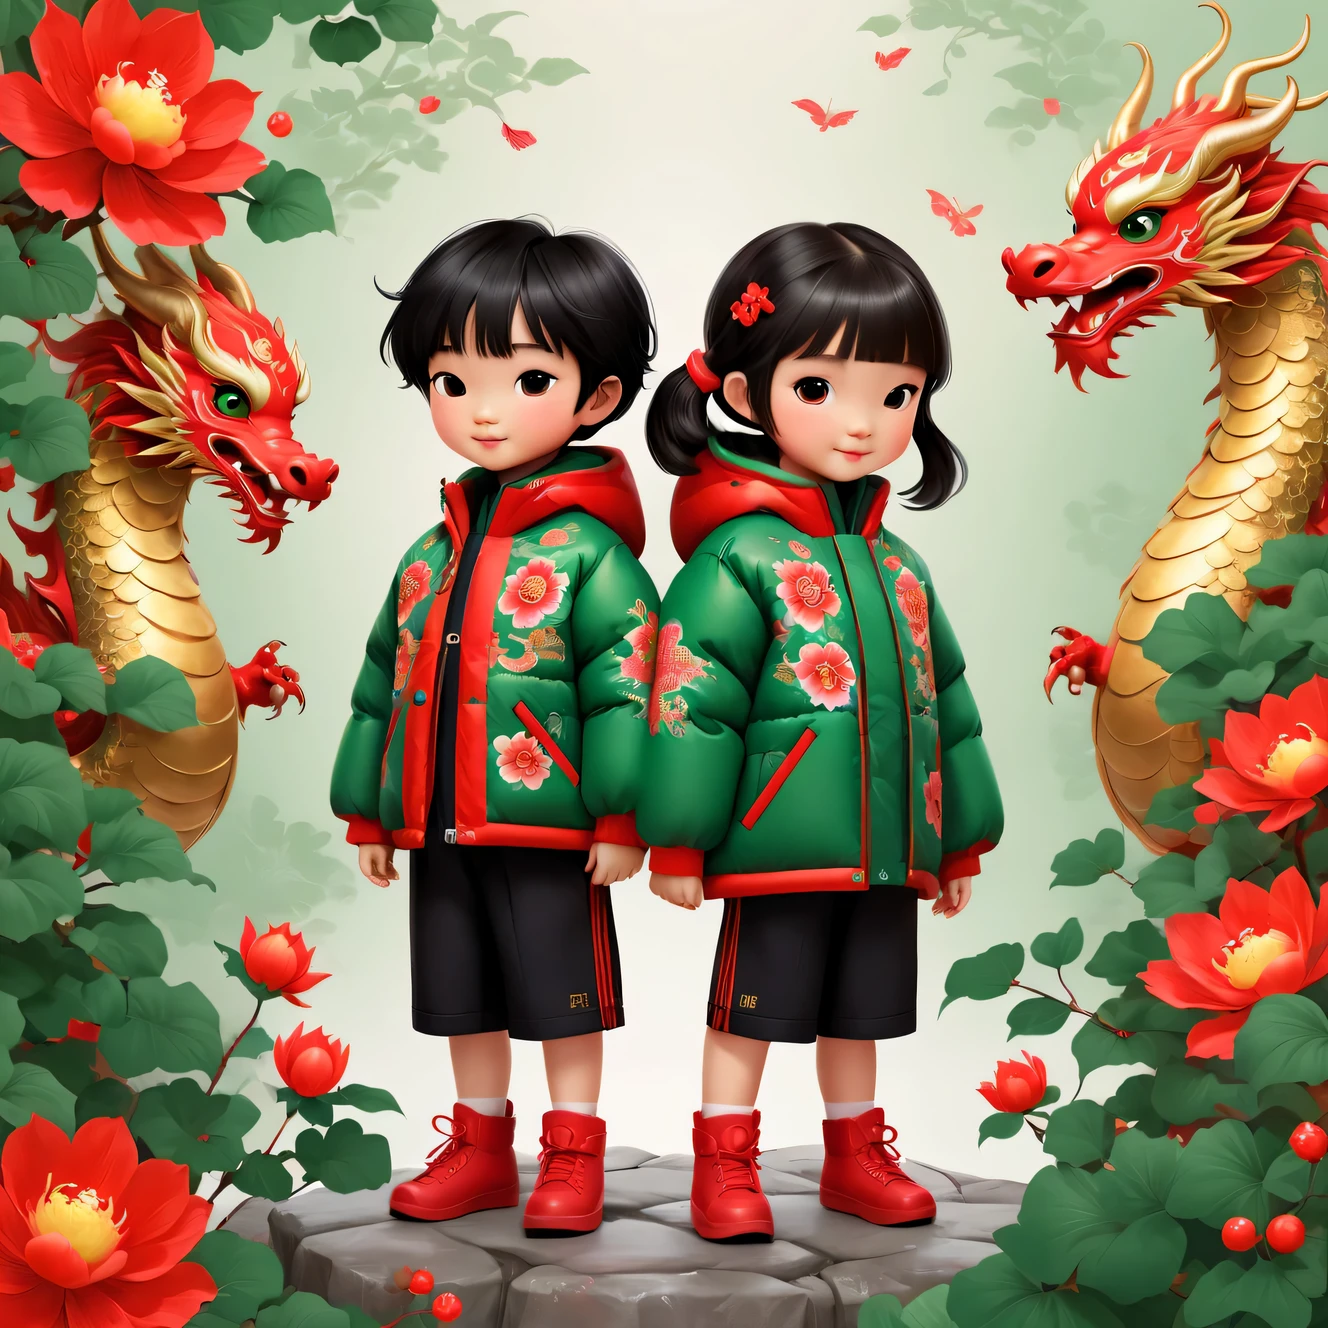 wallpaper design，2024，（Close-up of the cute and human zodiac dragon and the little Chinese boy and girl wearing northeastern red and green cotton-padded jackets），Northeastern large-flowered cotton-padded jacket inspired by 2023 Chinese college student fashion apparel，（Bowing action：1.34）, background：Chinese safflower cotton cloth，country style，,very festive, Chinese elements, New year, super fun, illustration, cartoon, 32k, Pixar style，